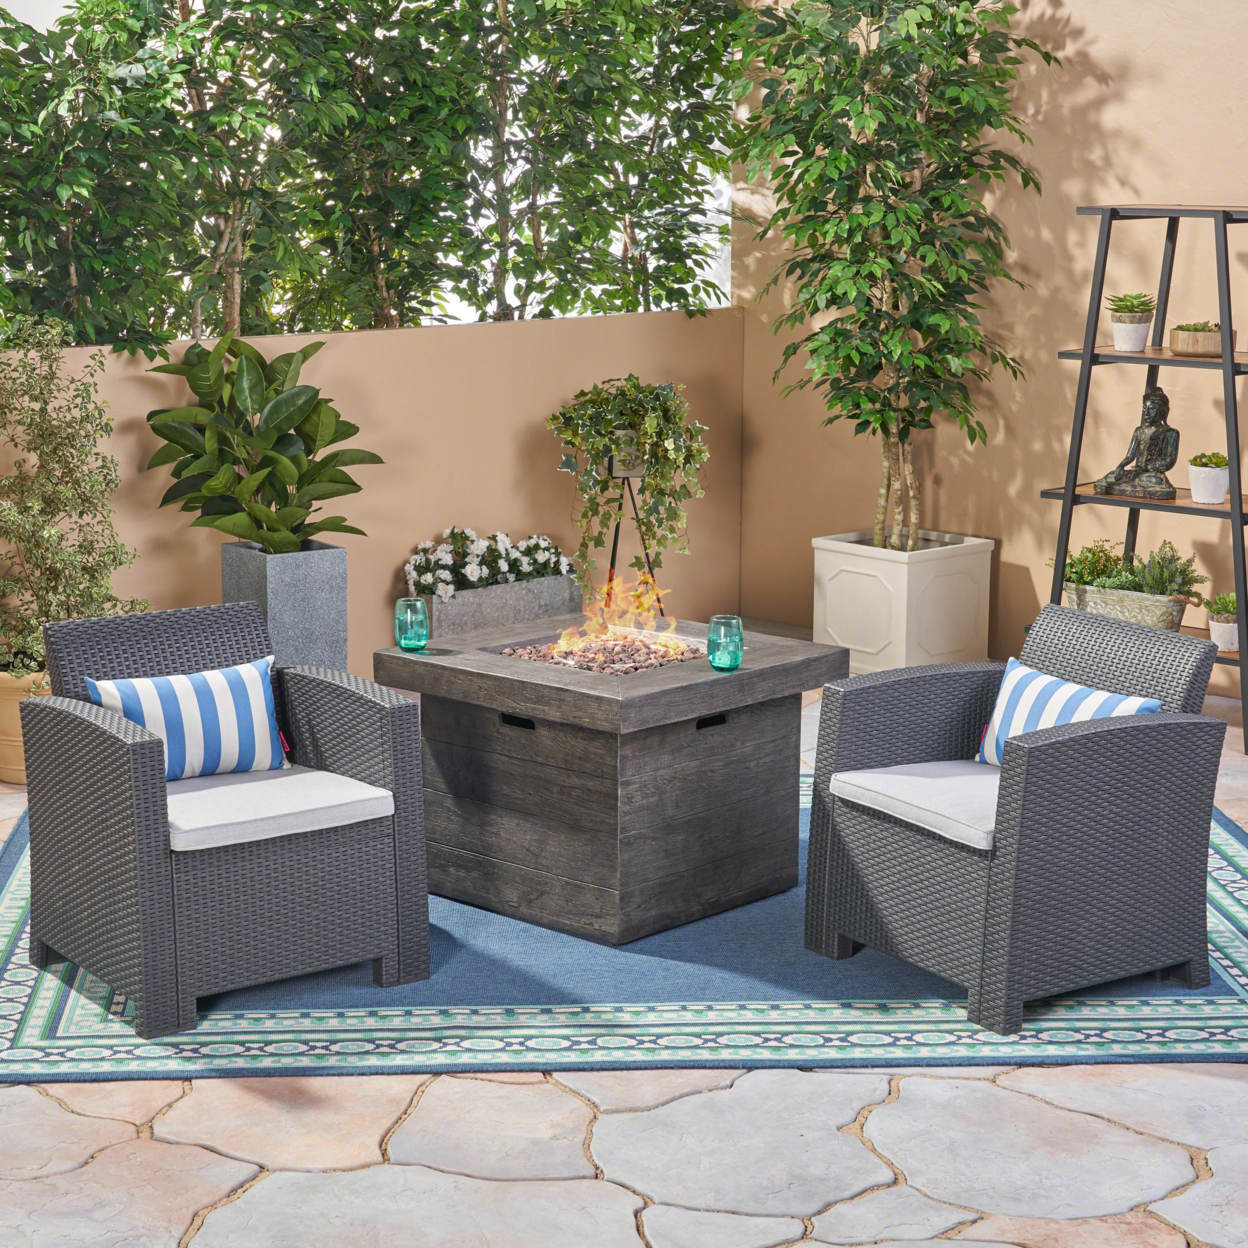 Ollie Outdoor Wicker Club Chair Chat Set With Fire Pit - Charcoal + Light Gray + Gray